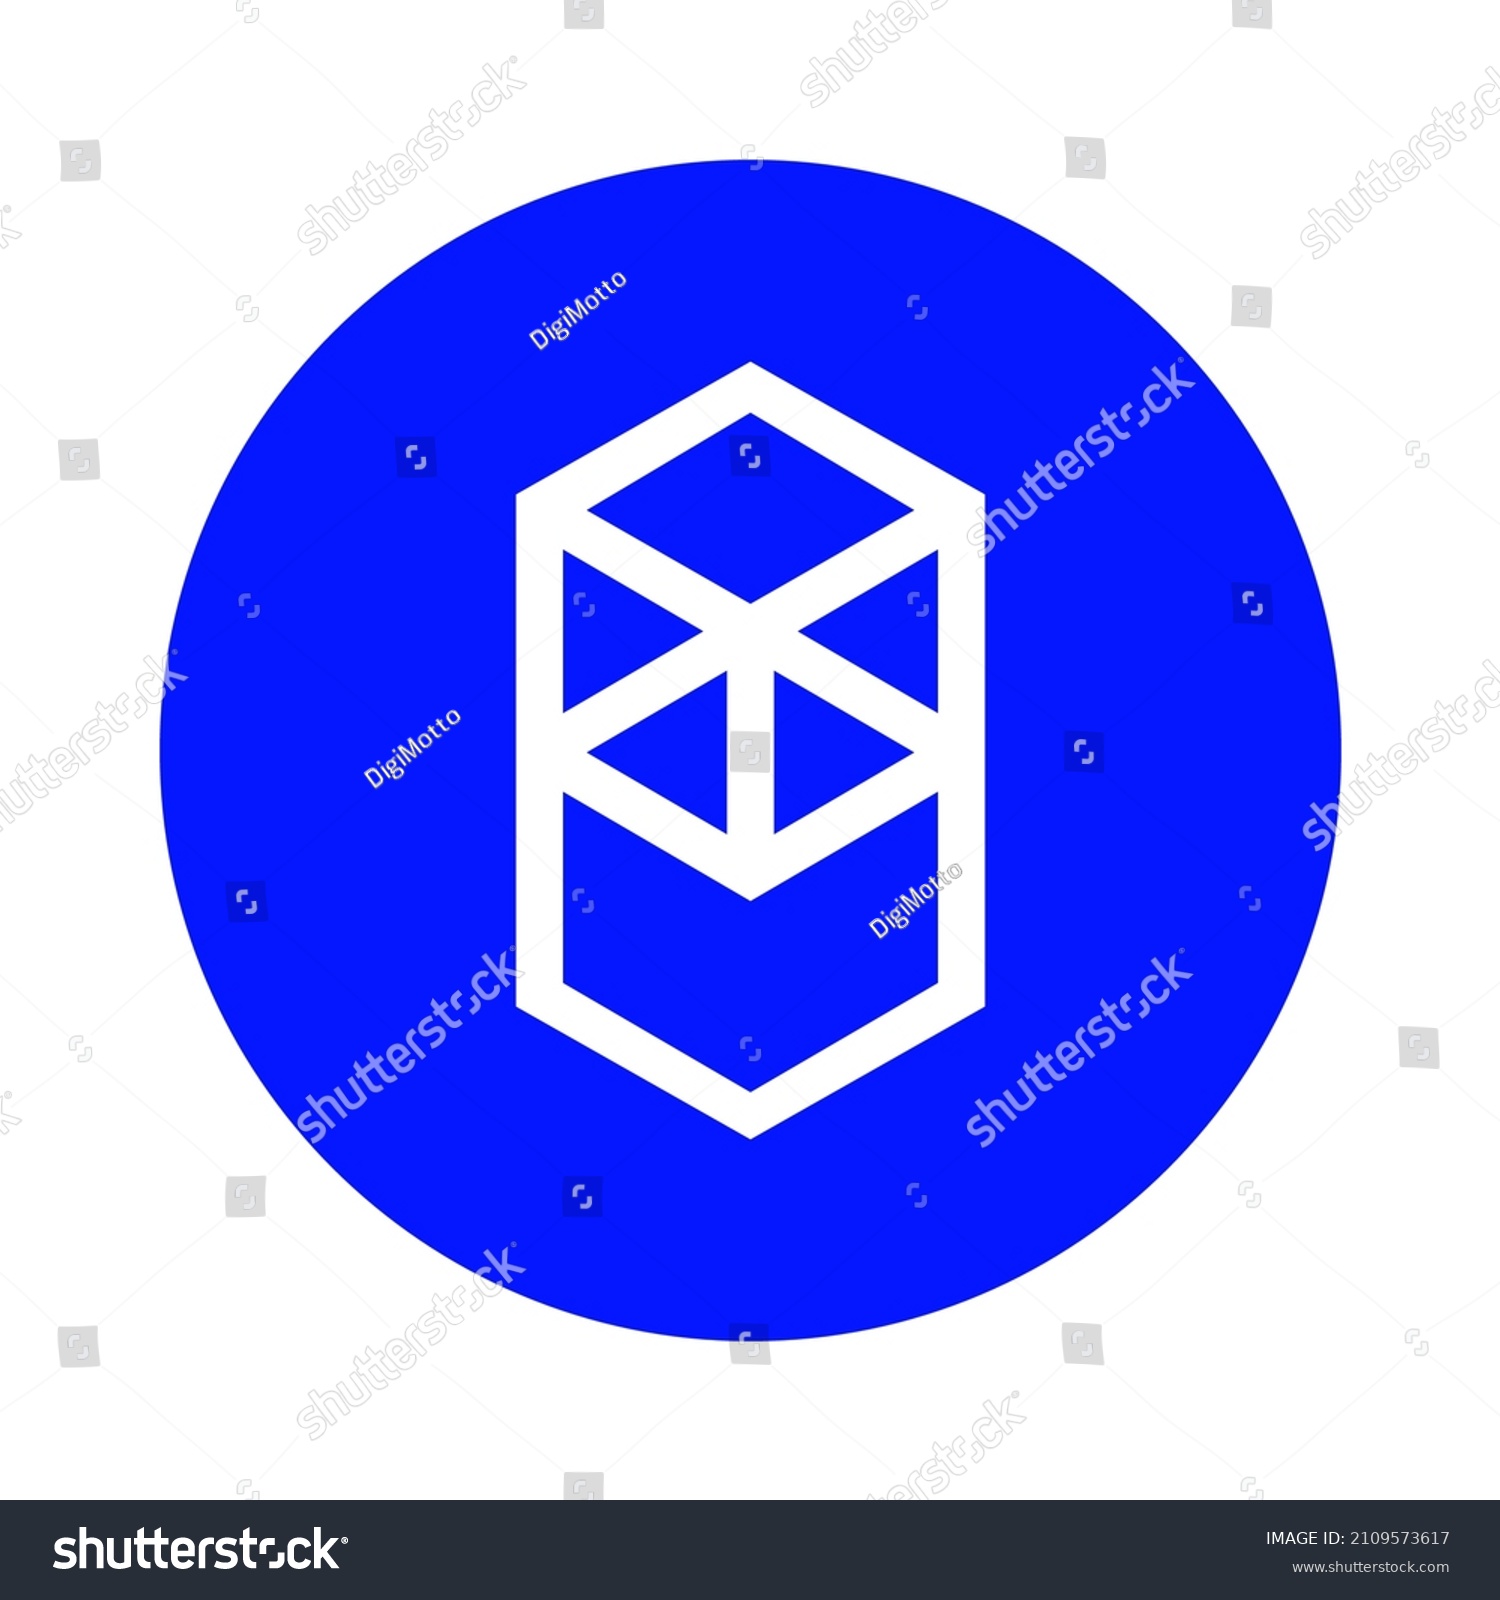 SVG of Fantom FTM Coin Icon Cryptocurrency logo vector illustration. Best used for T-shirts, mugs, posters, banners, social media and trading websites. svg